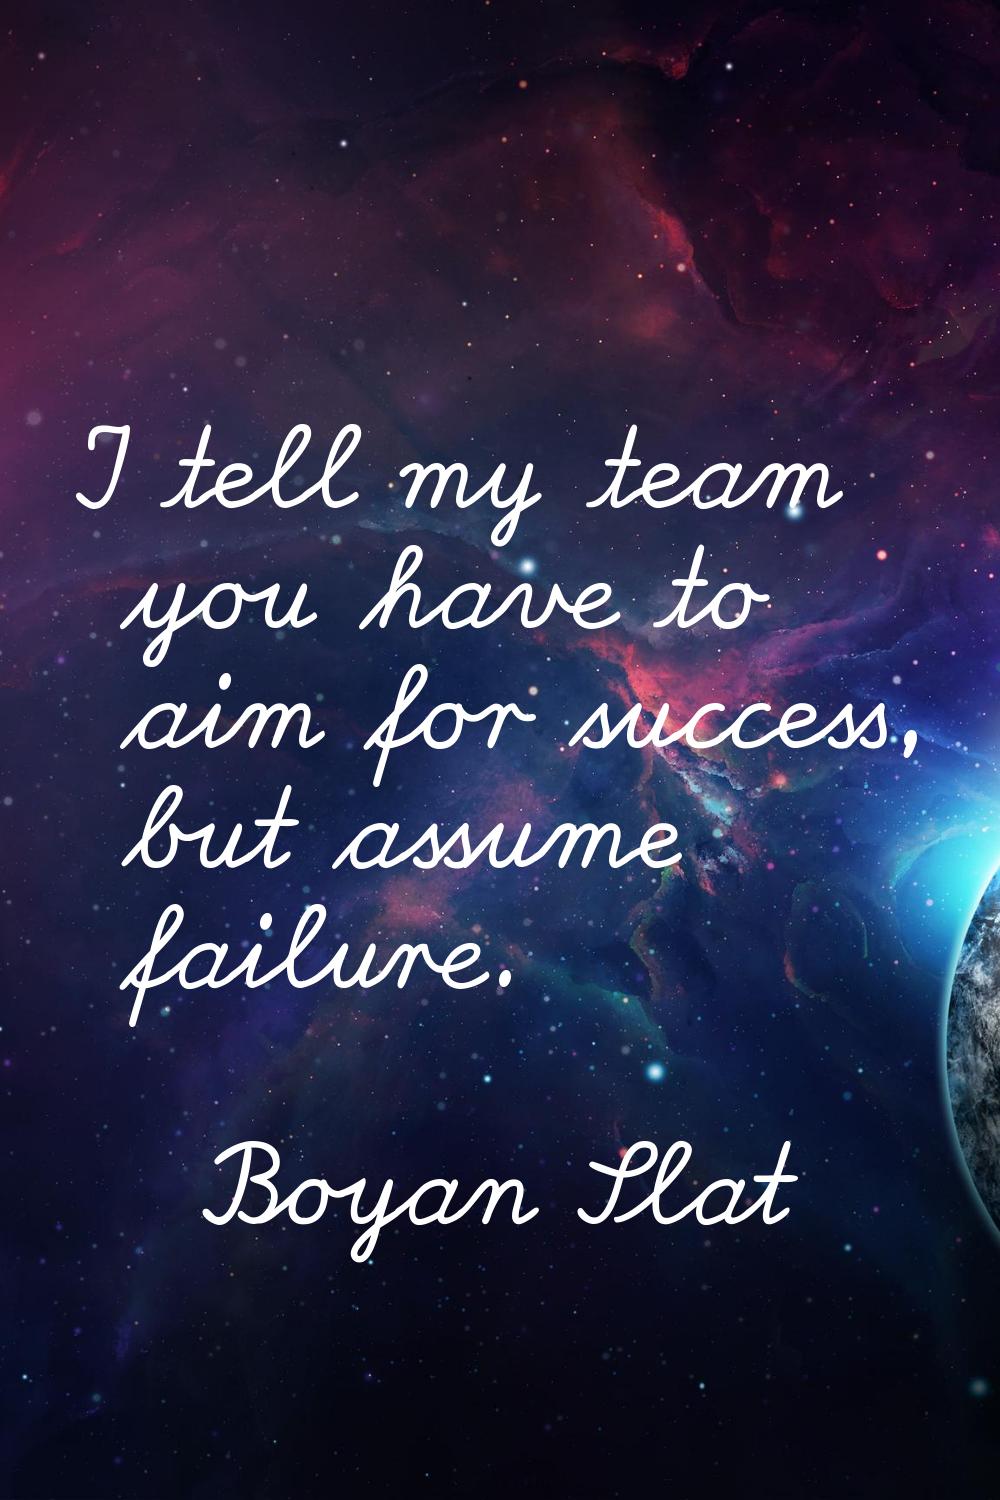 I tell my team you have to aim for success, but assume failure.